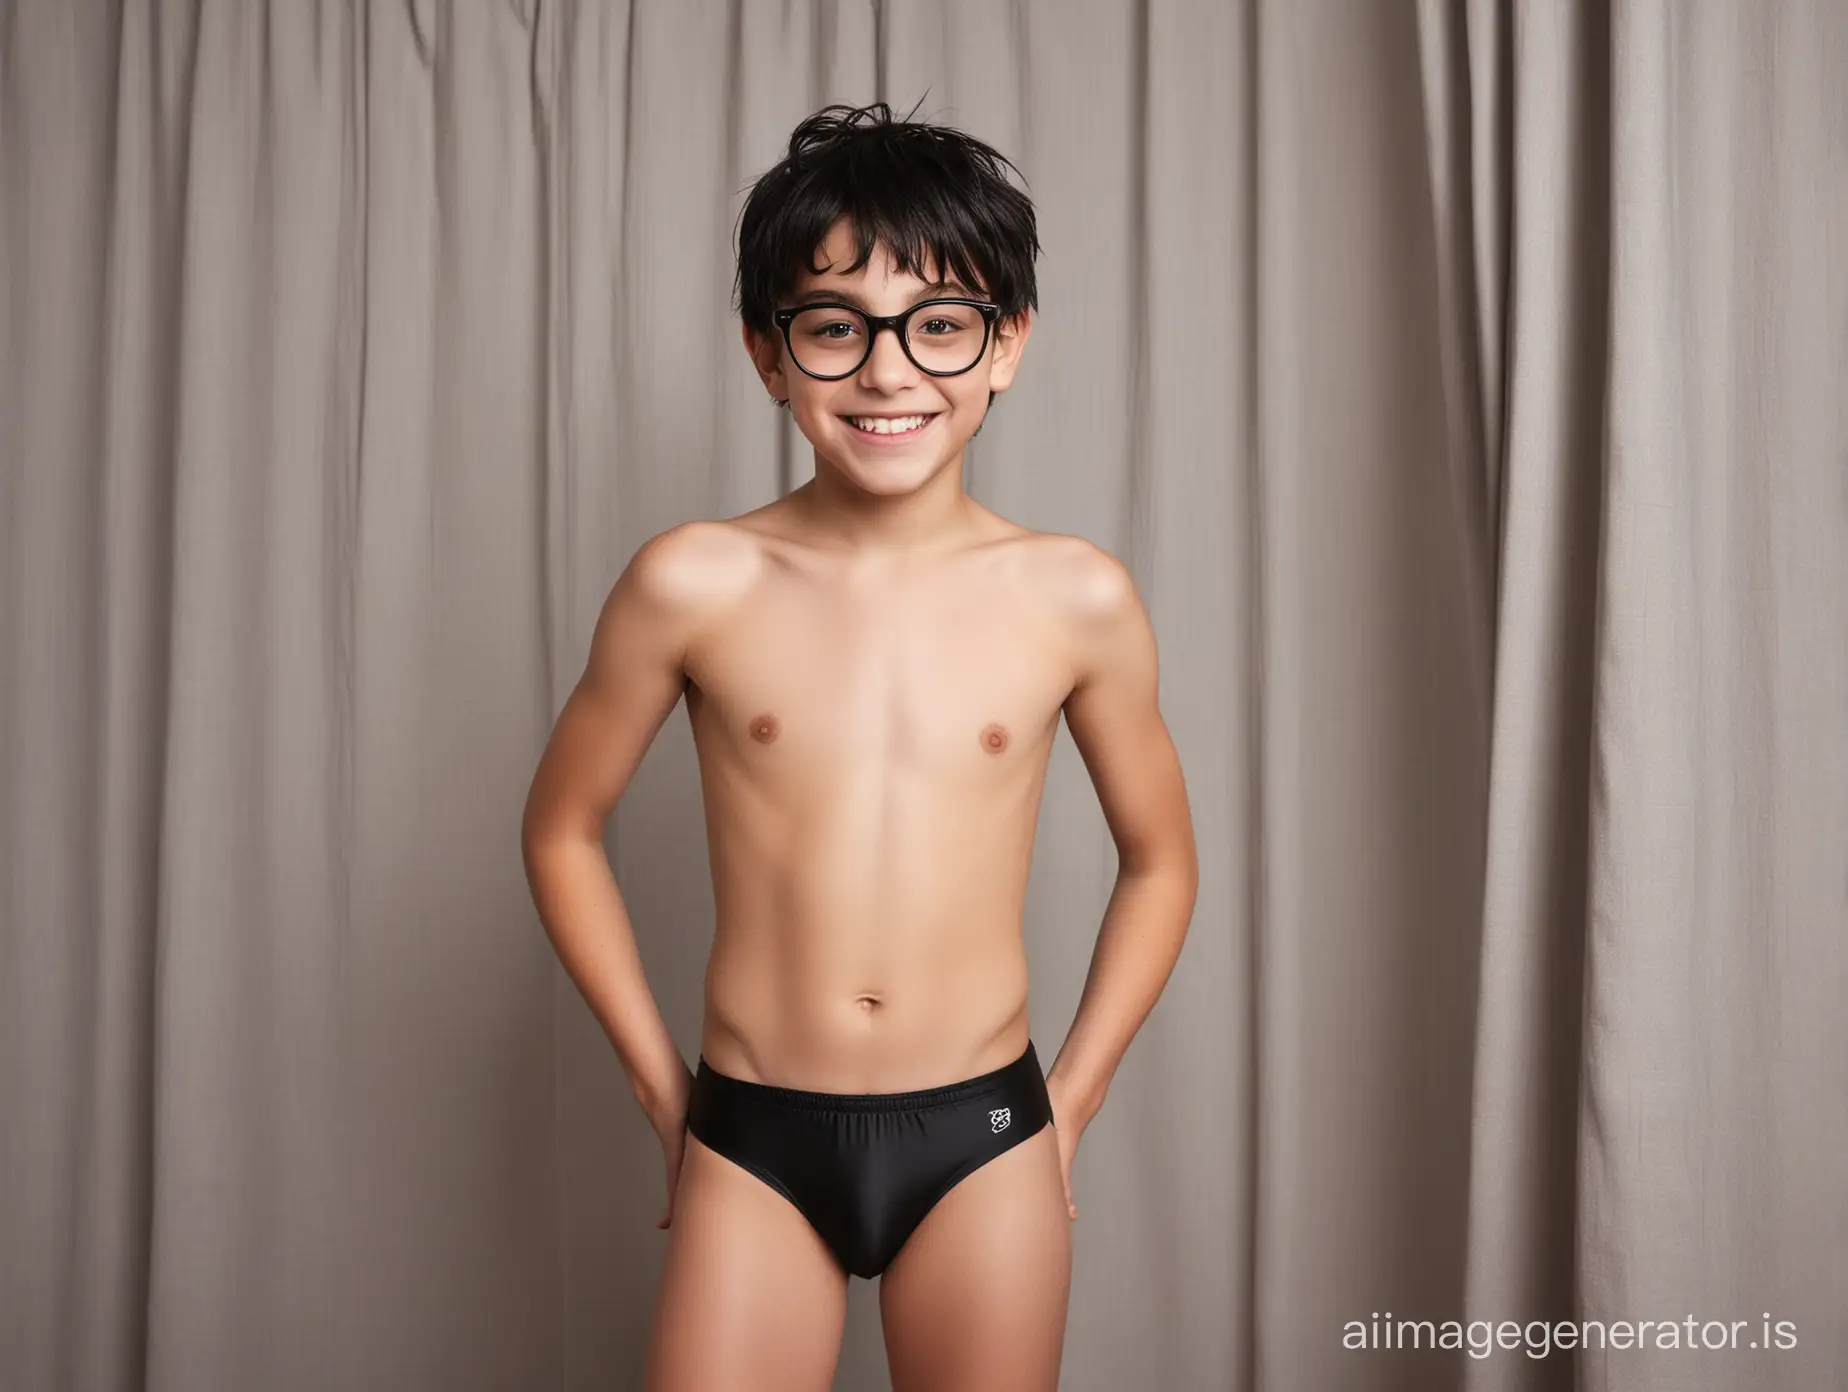 Youthful-Boy-in-Swimwear-Exuding-Charm-and-Modesty